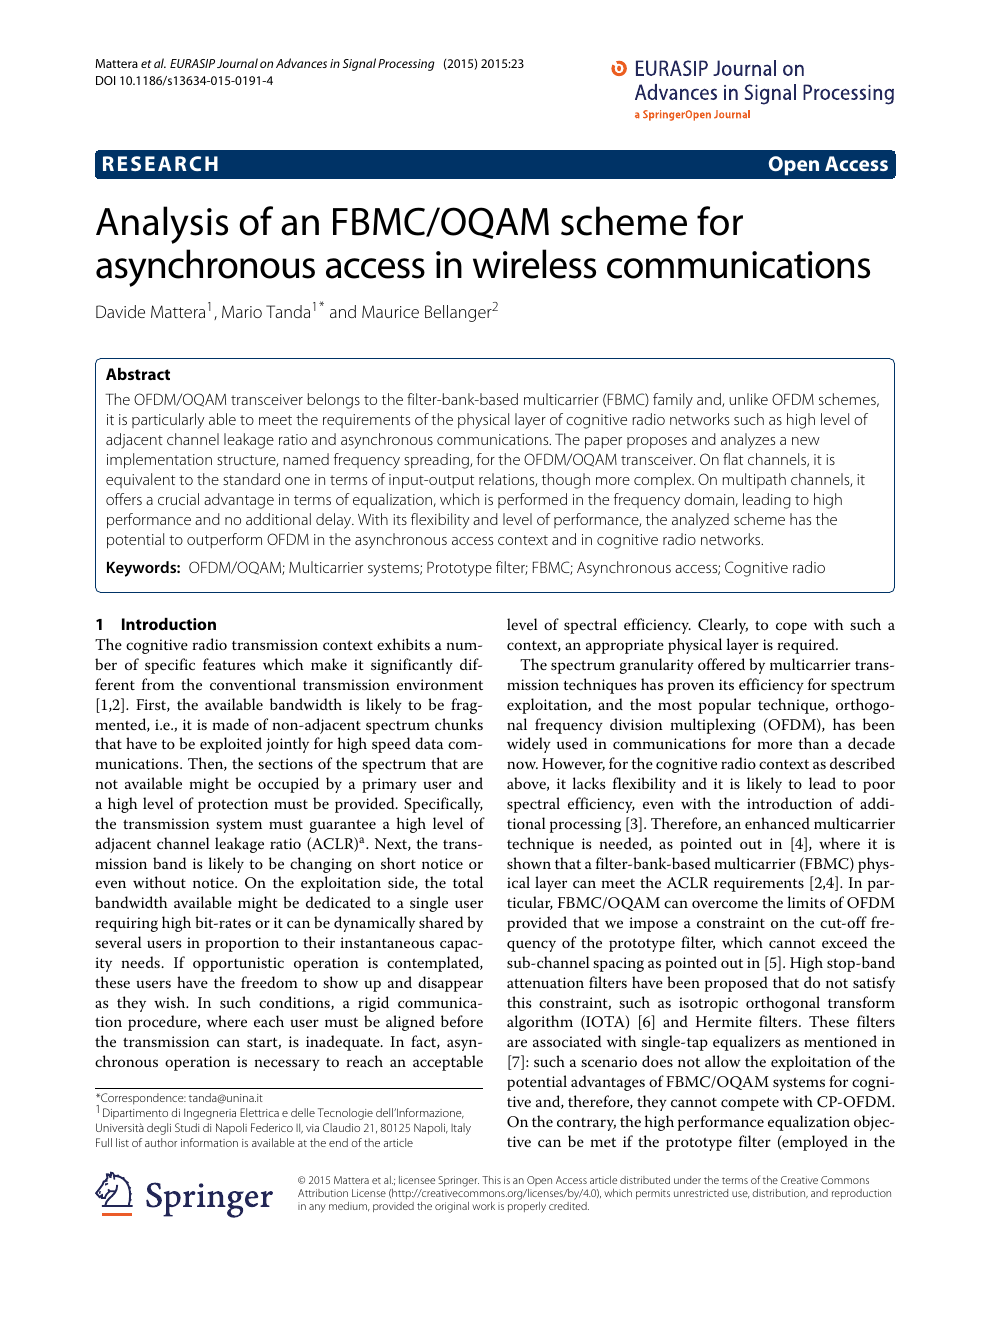 Analysis of an FBMC/OQAM scheme for asynchronous access in